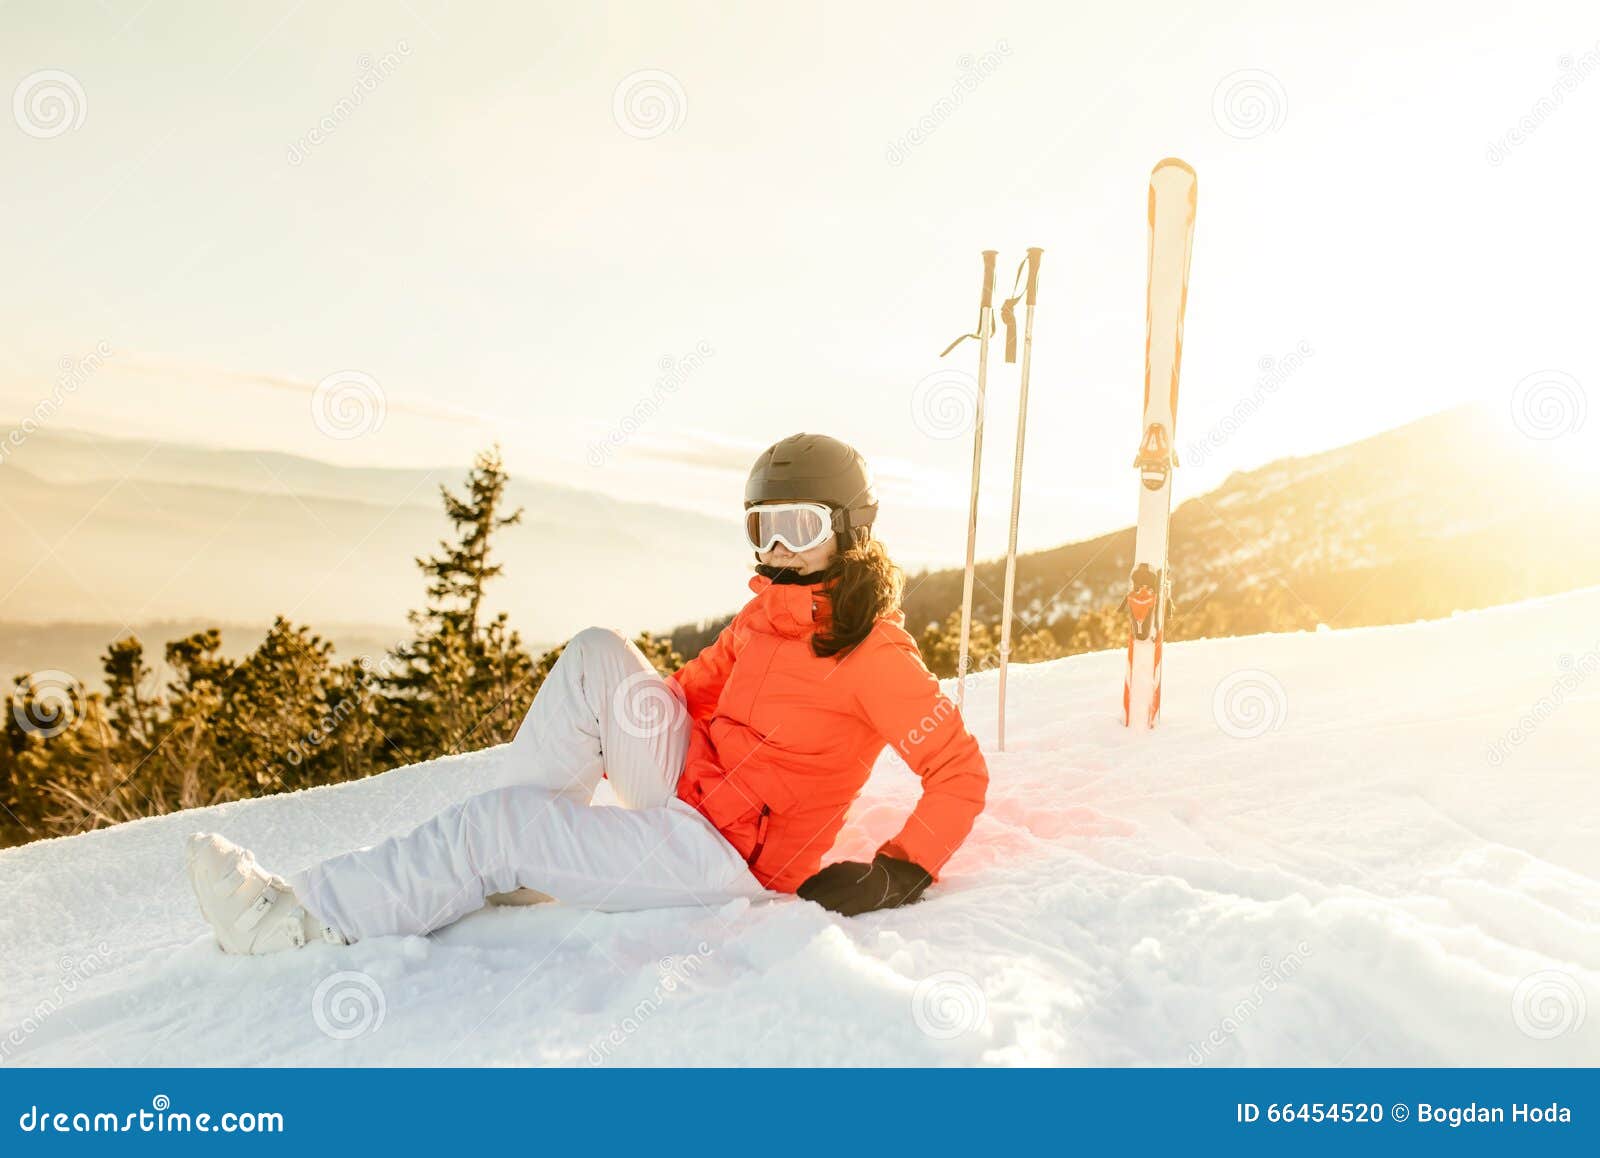 woman enjoying the view from mountain slopes, relaxing